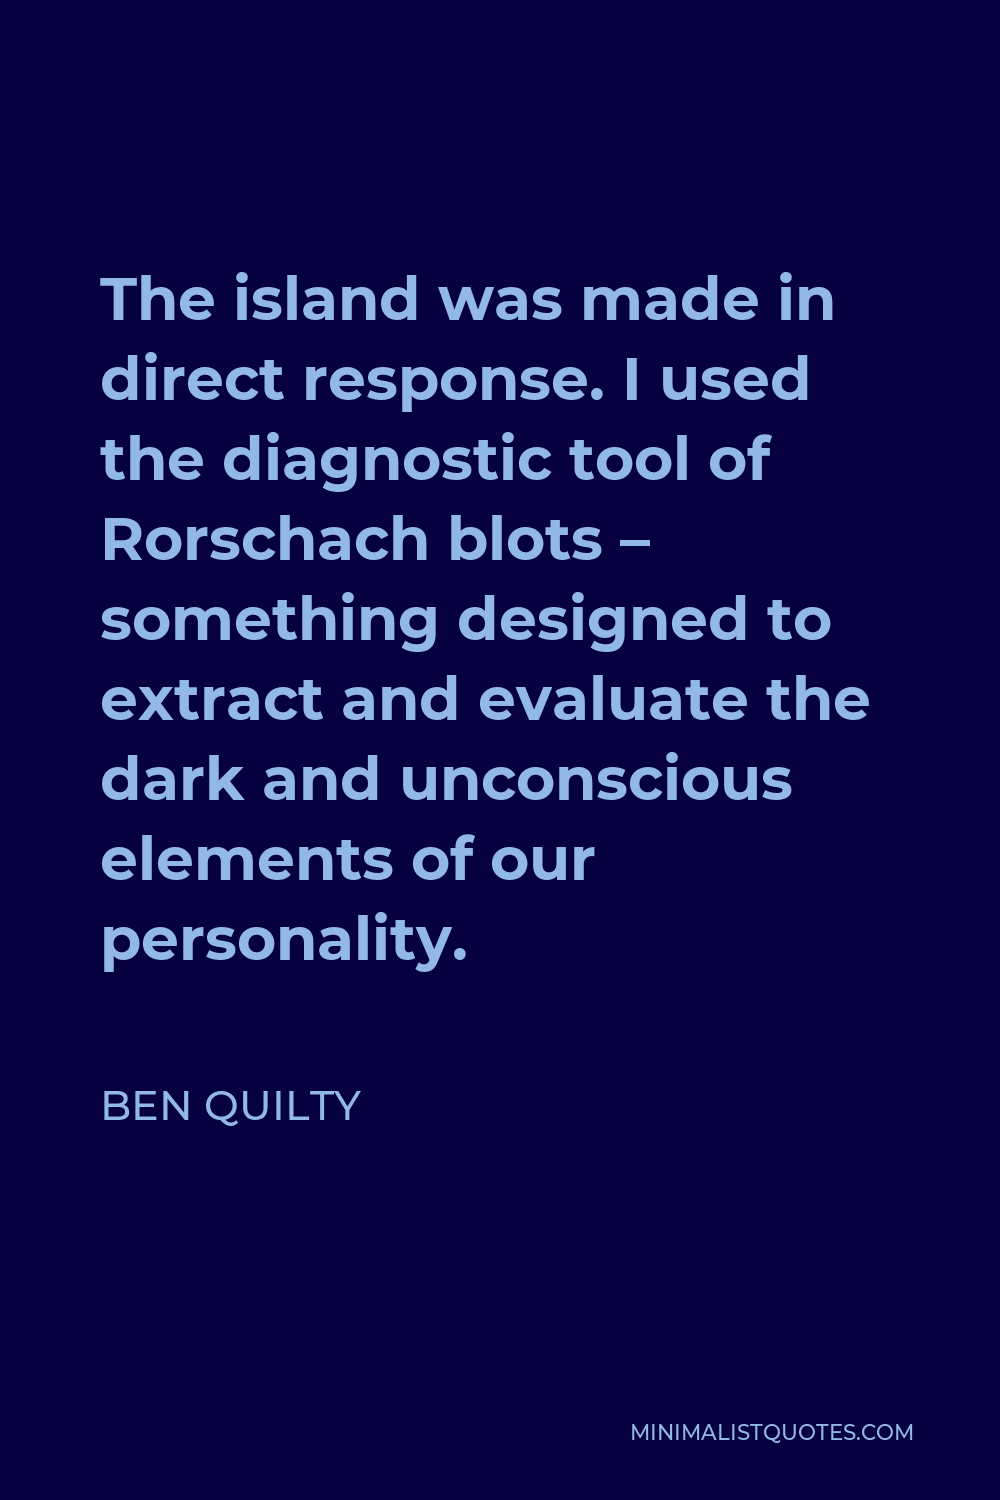 Ben Quilty Quote - The island was made in direct response. I used the diagnostic tool of Rorschach blots – something designed to extract and evaluate the dark and unconscious elements of our personality.